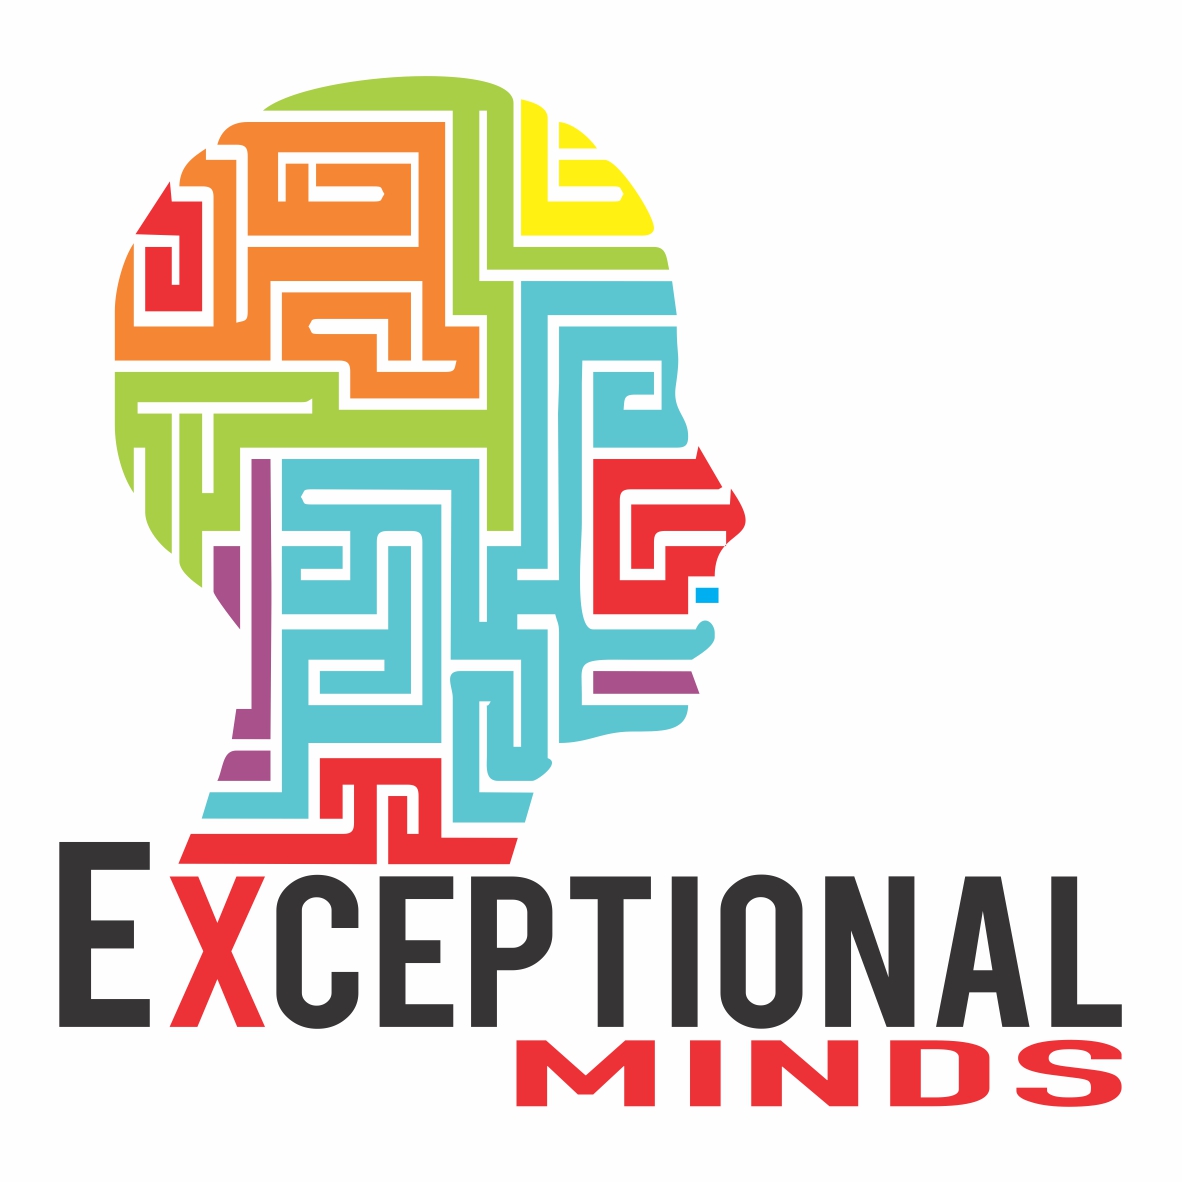 Exceptional Minds